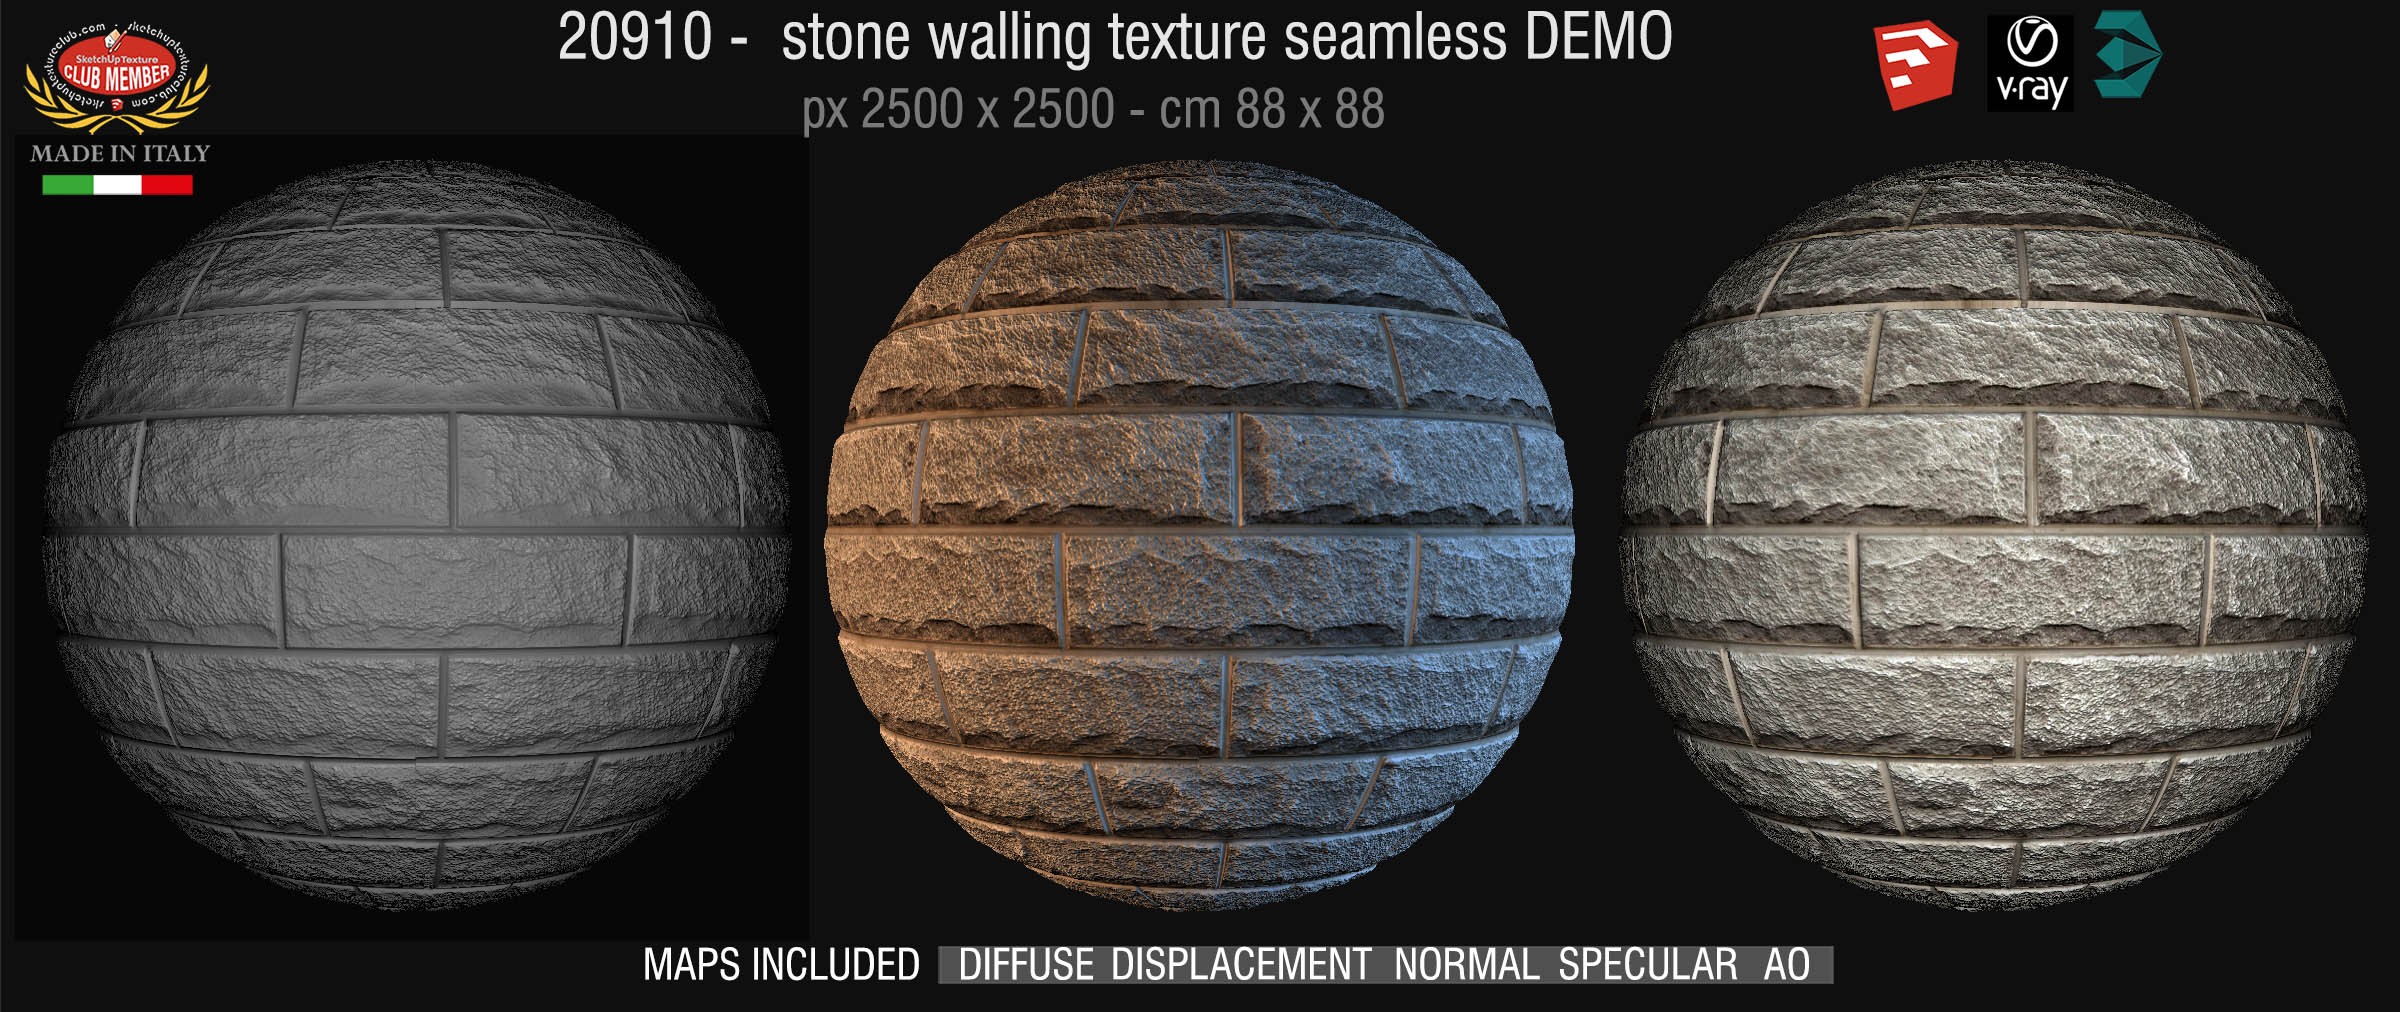 20910 HR Stone walling texture seamless + maps DEMO